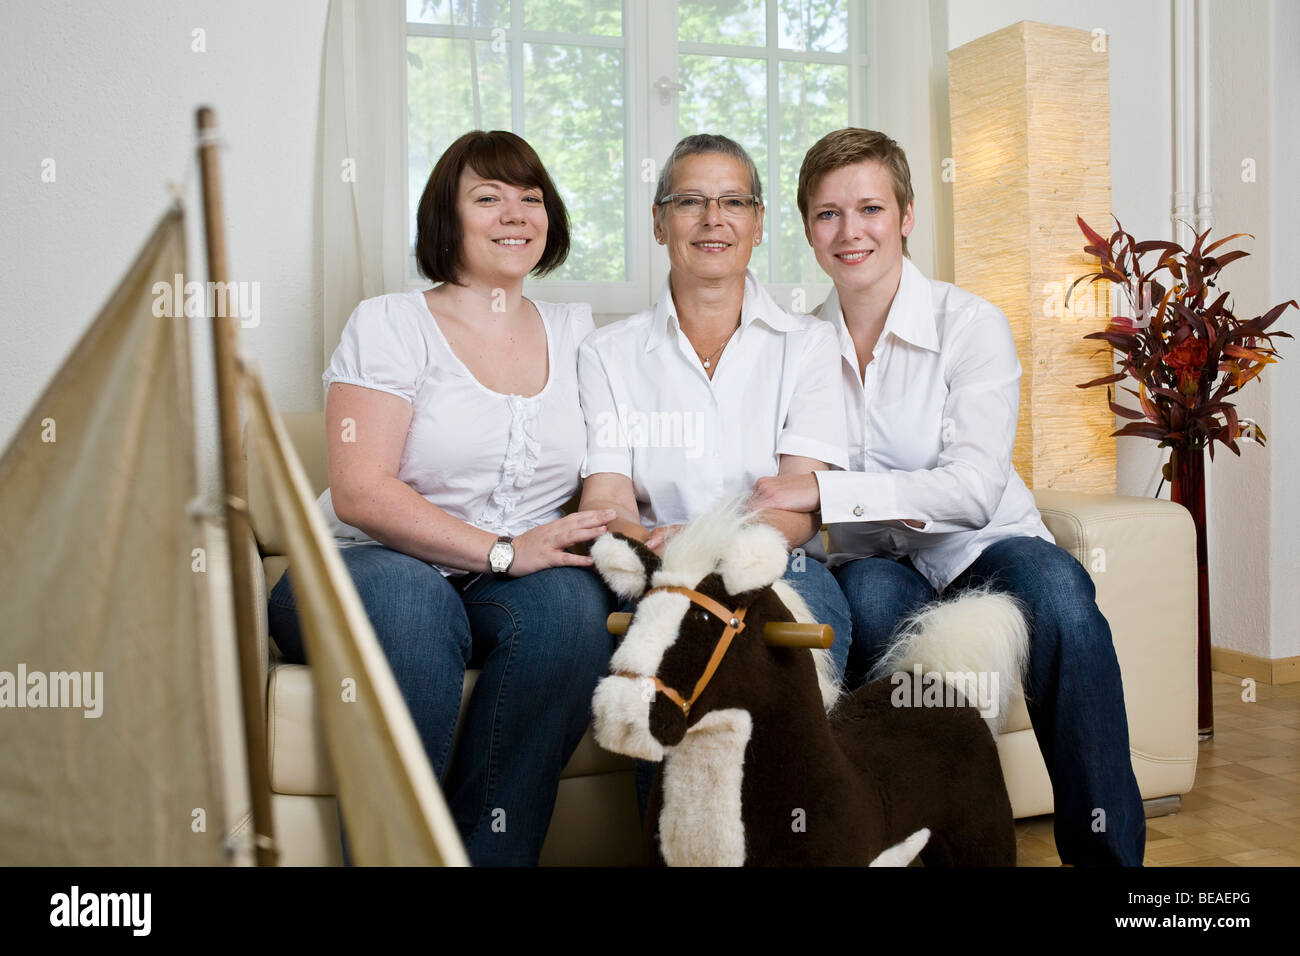 Formal portrait of a mother and her two daughters Stock Photo